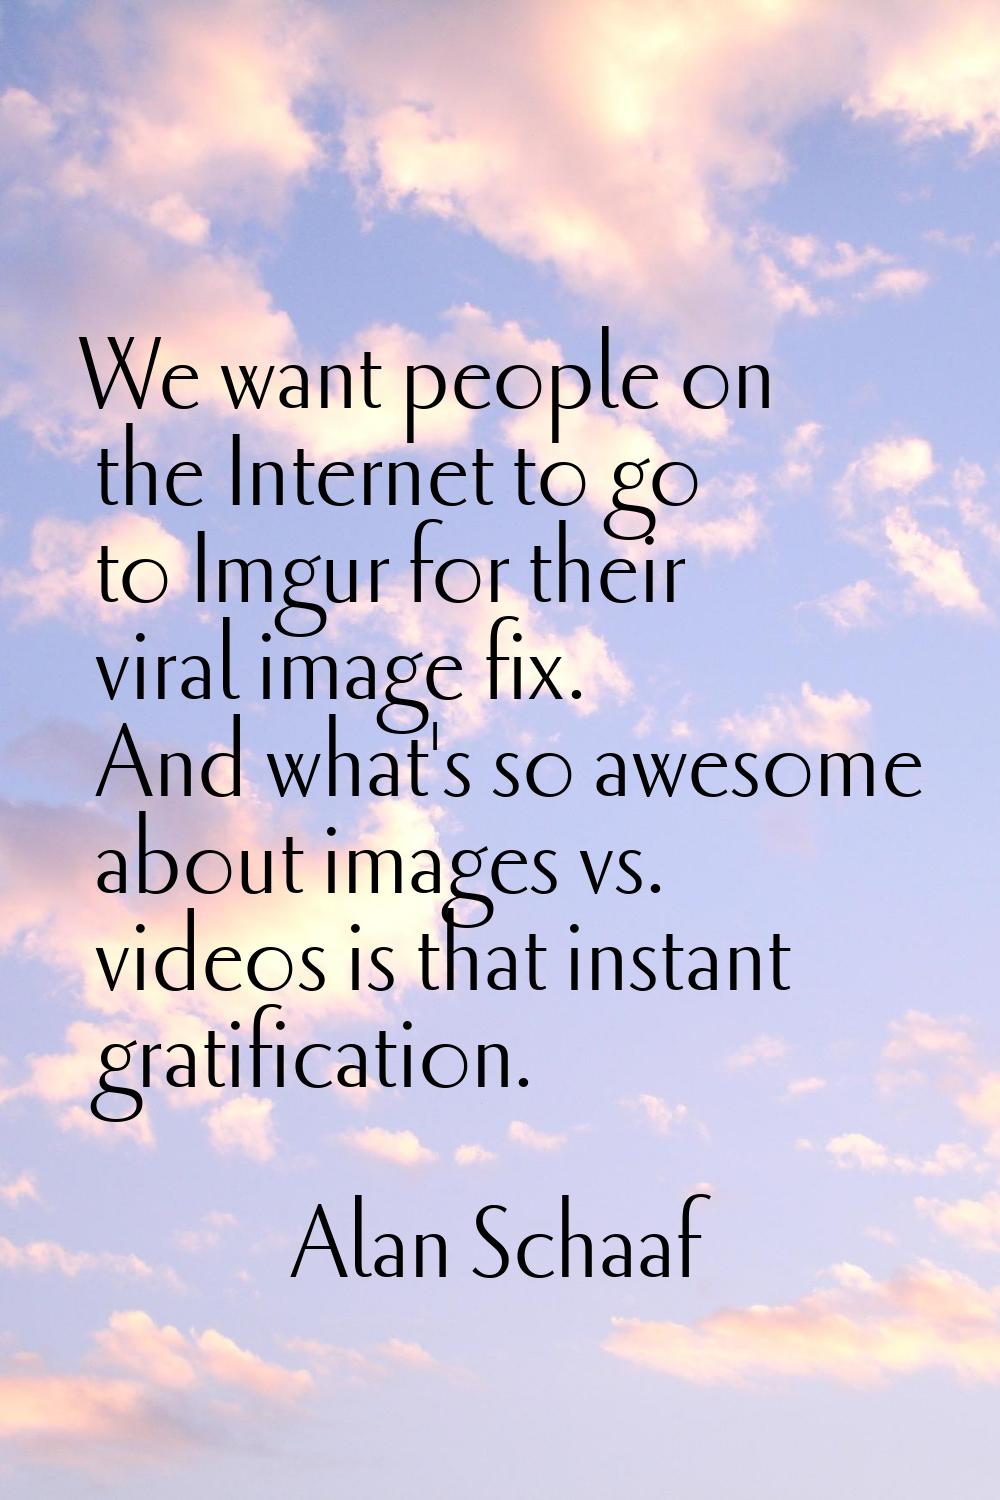 We want people on the Internet to go to Imgur for their viral image fix. And what's so awesome abou